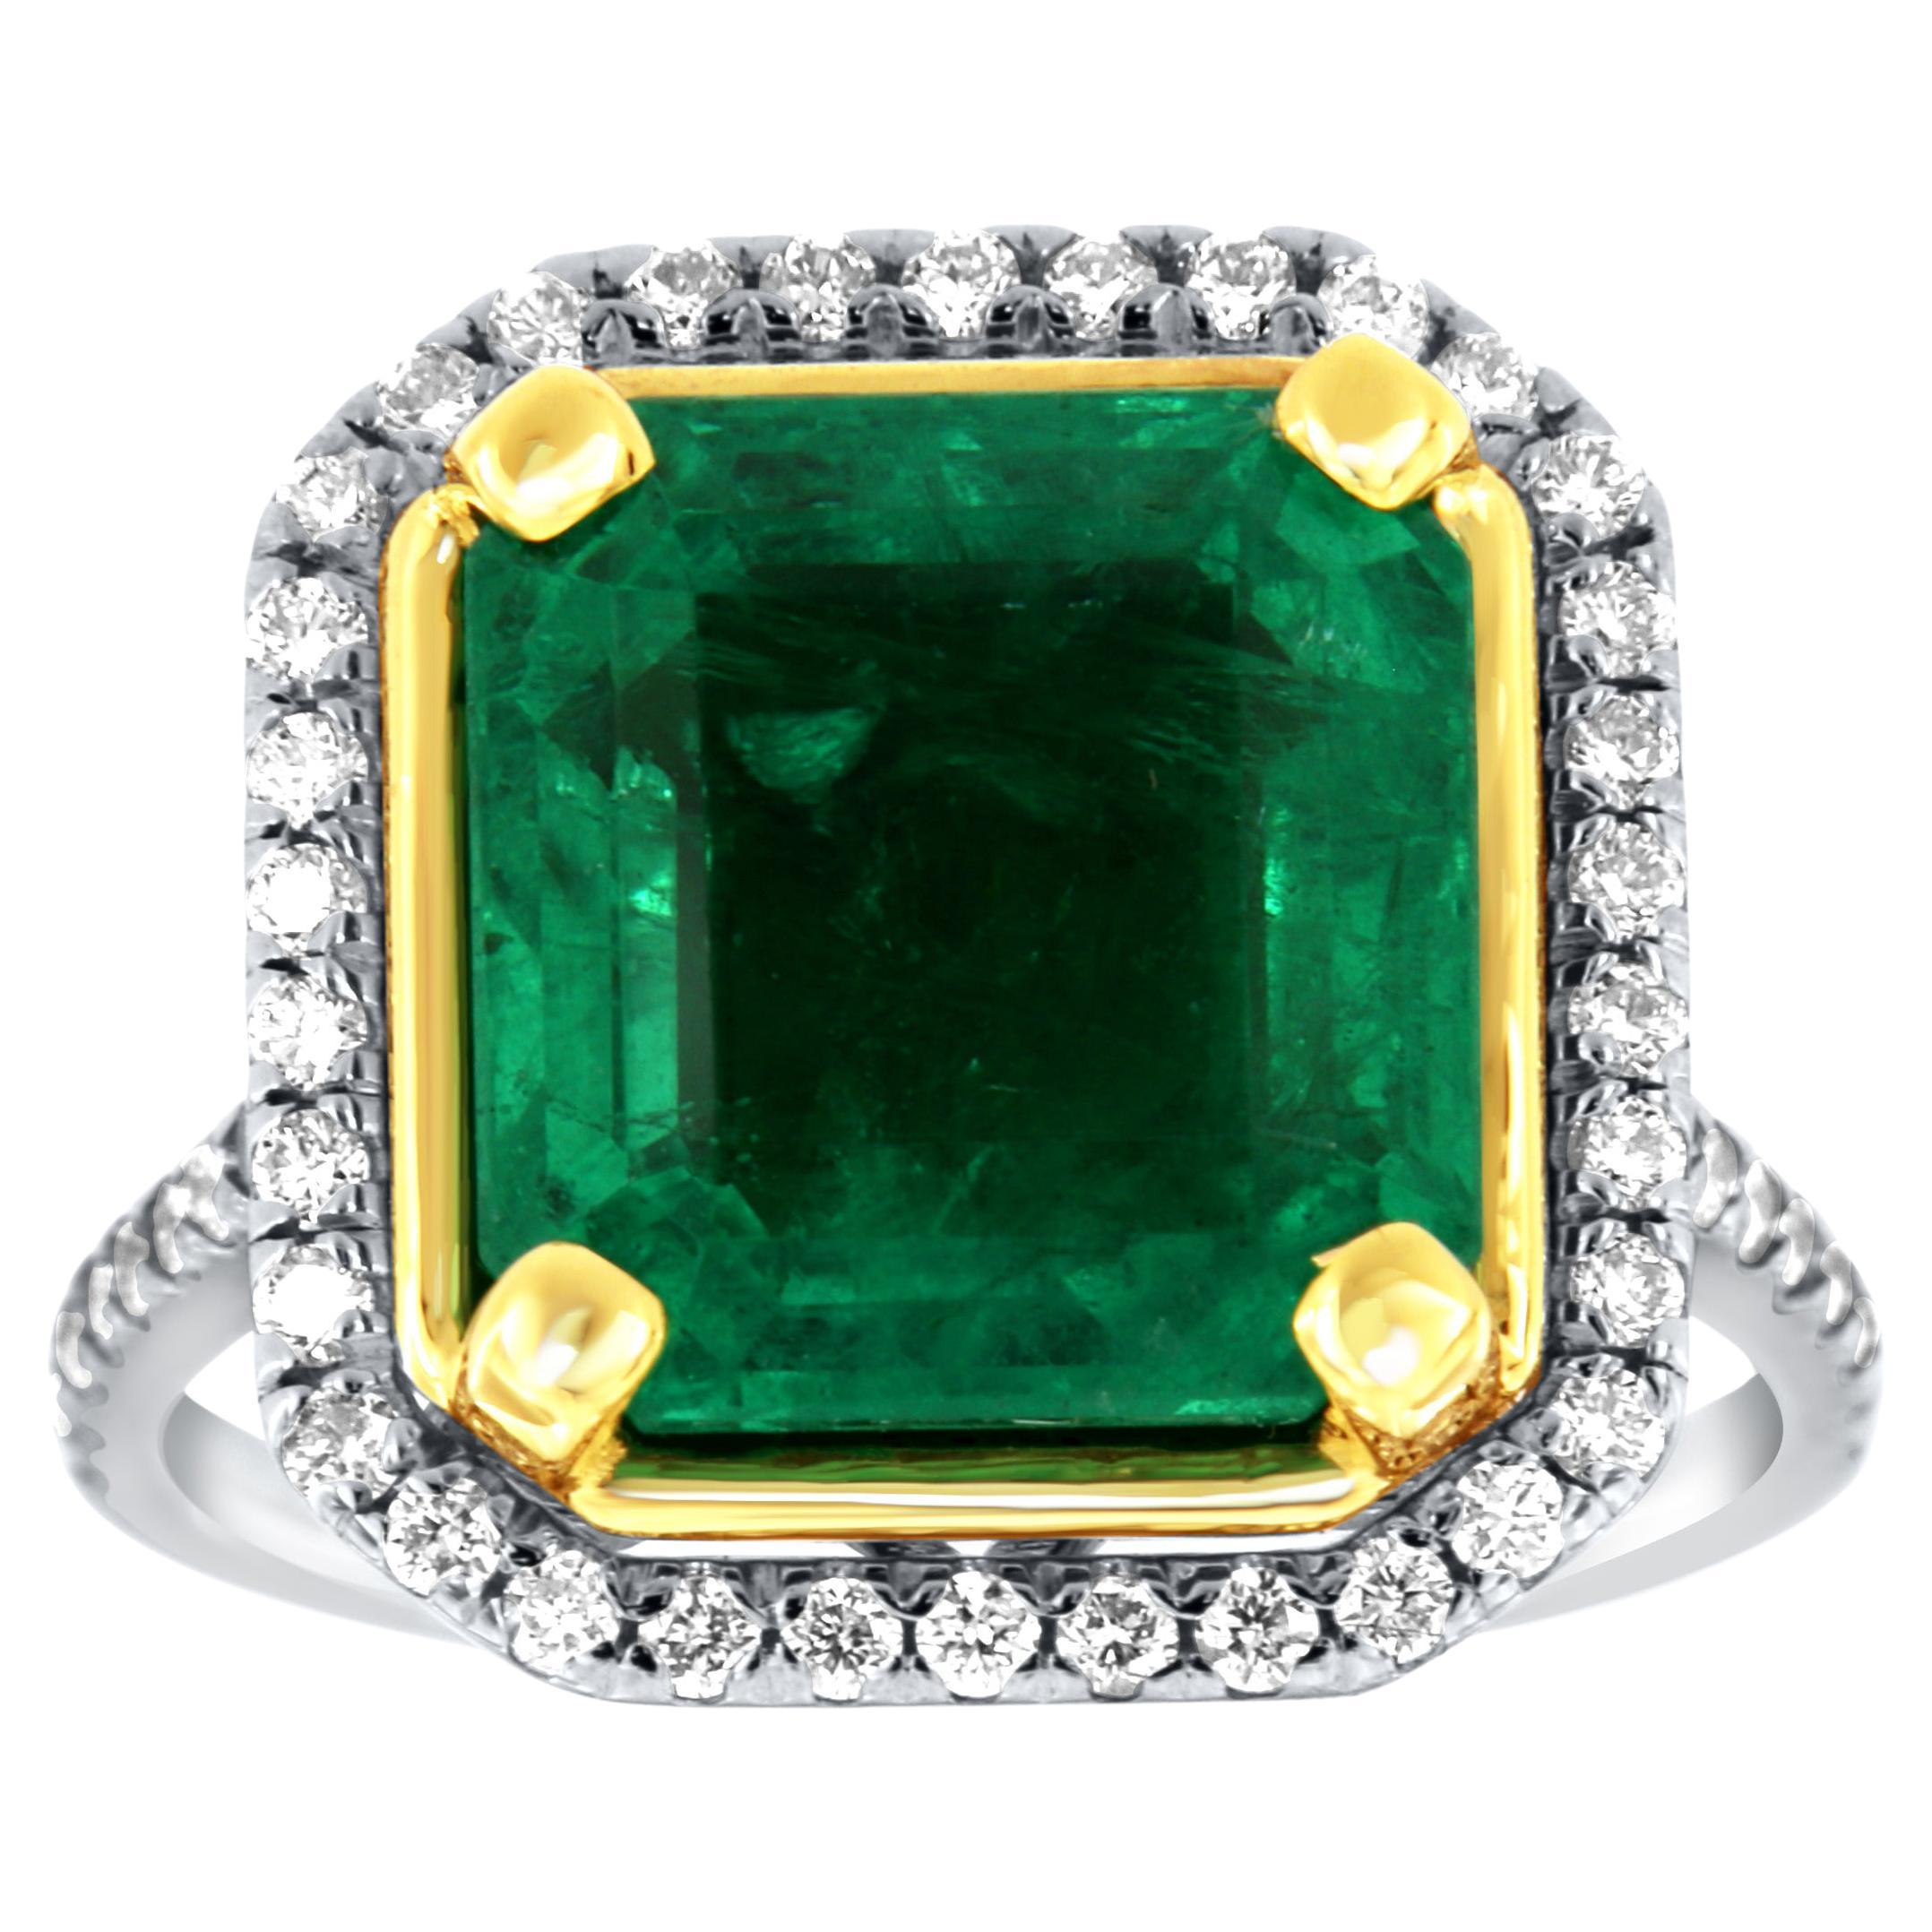 GIA Certified 6.09 Carat Green Emerald 18k White & Yellow Gold Halo Diamond Ring For Sale